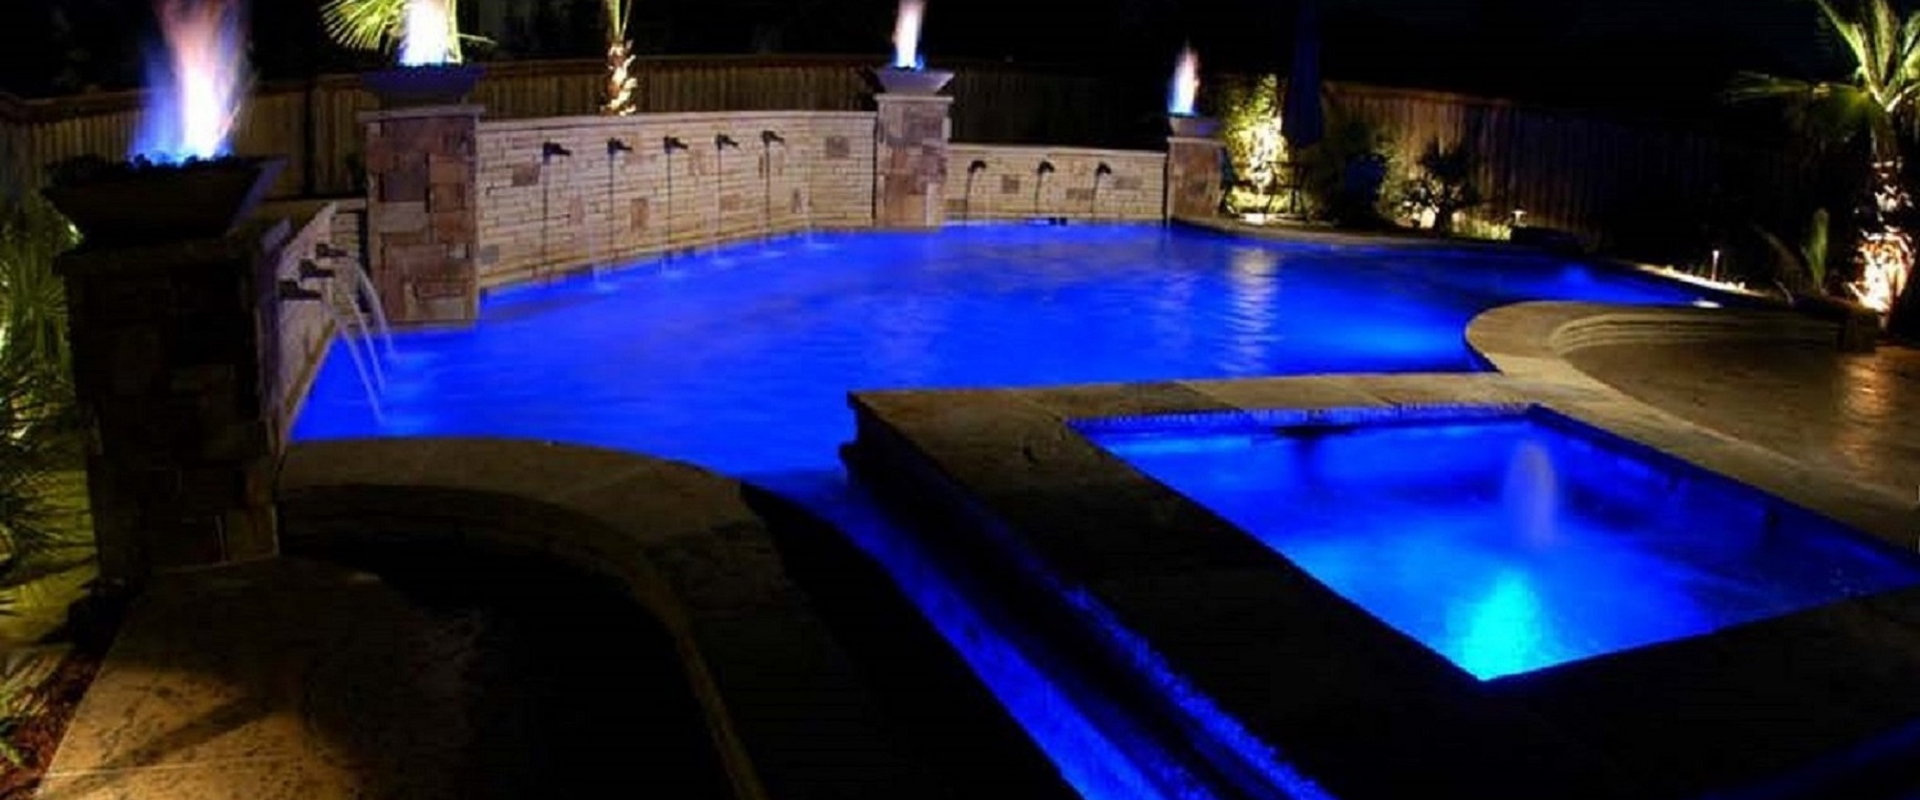 Specializing In A Job Done Right Pool Tile, Coping, Plastering, And Remodeling For DFW